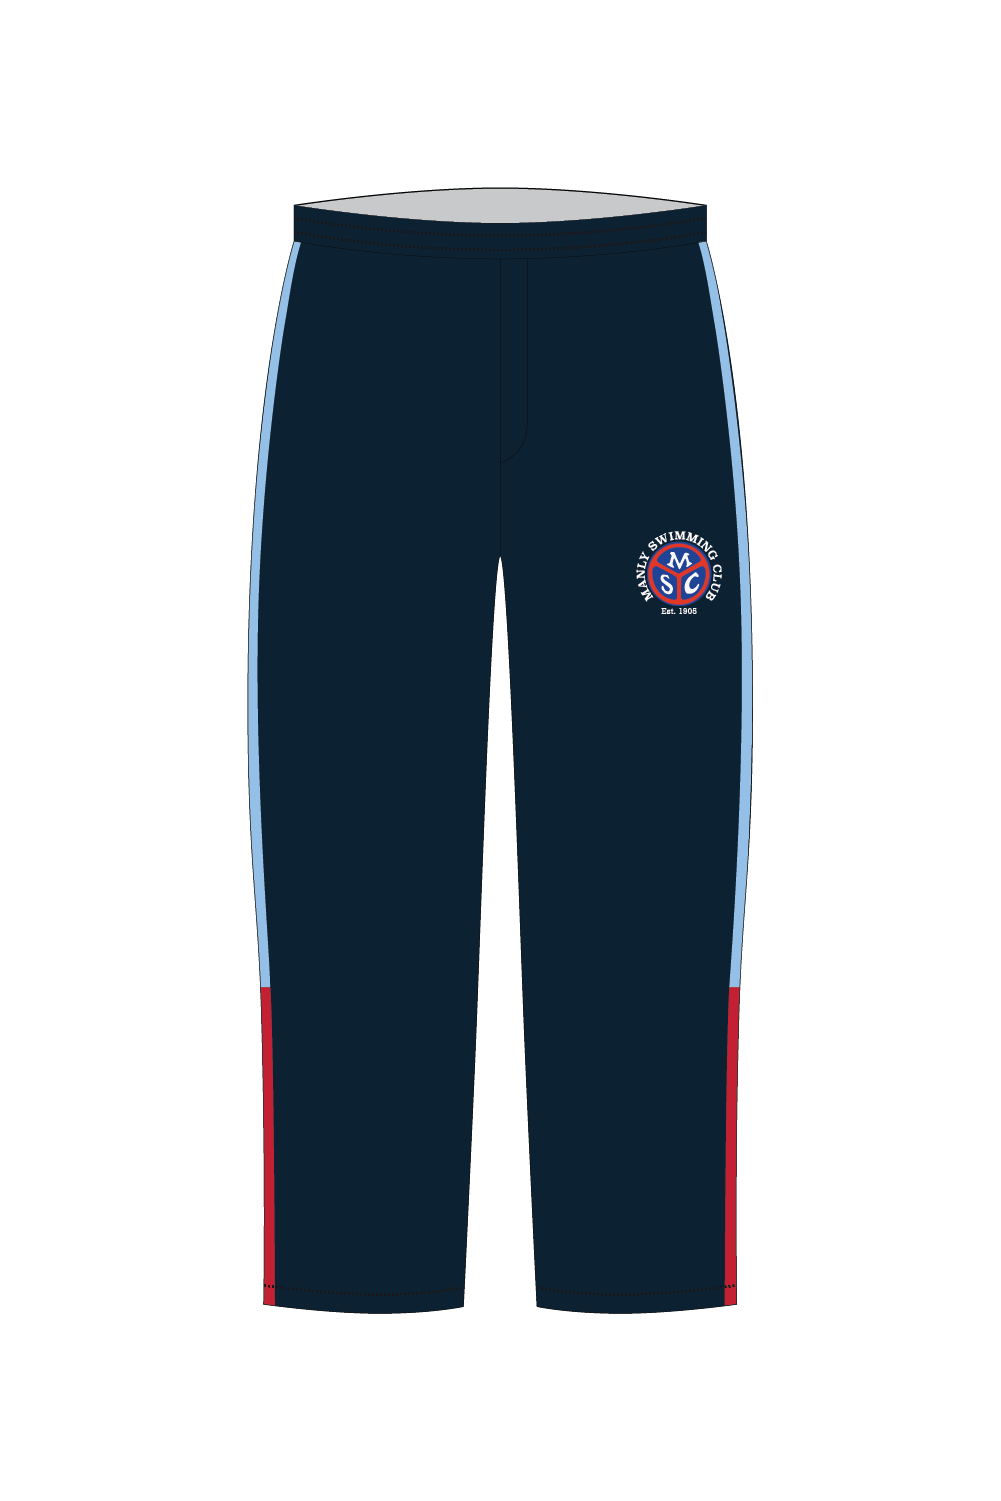 Manly Swimming Club Tracksuit Pants